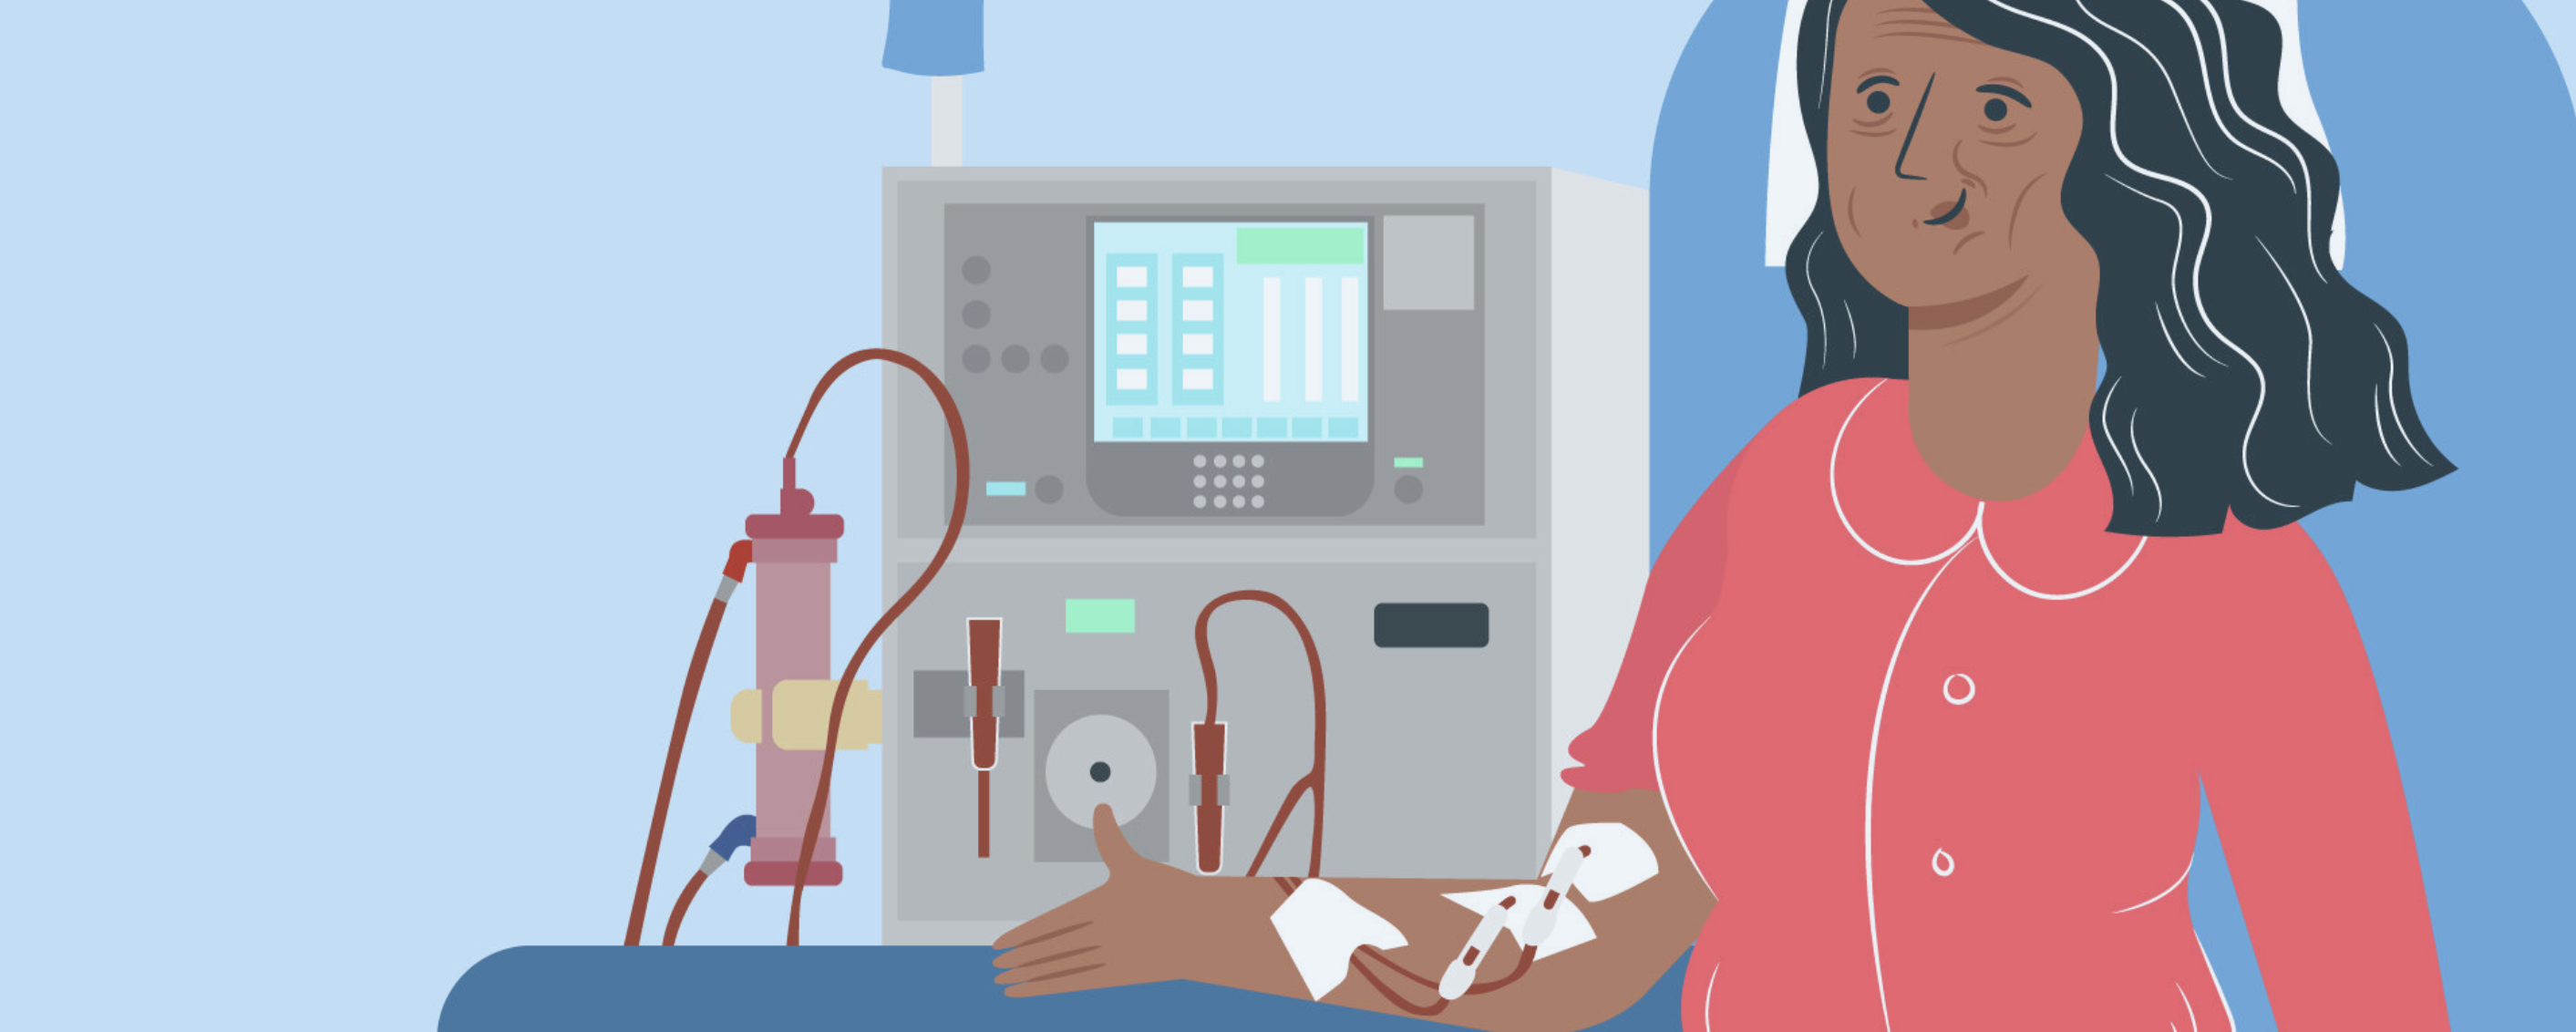 VenoStent has a new technology to improve outcomes for dialysis patients |  TechCrunch